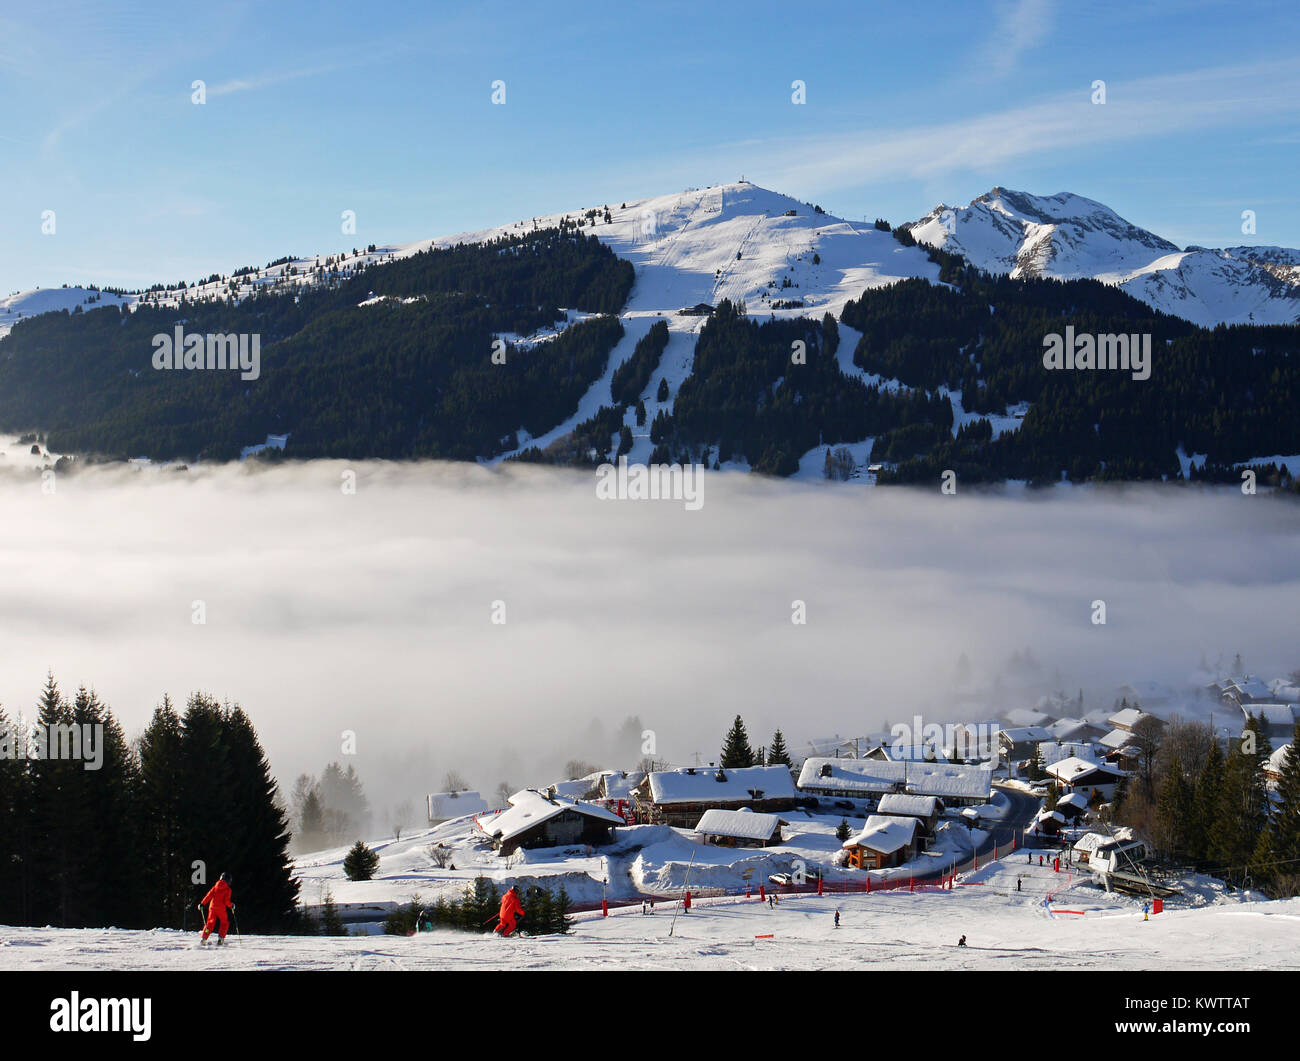 Winter scenes in the ski and snowboarding resort of Les Gets, France Stock Photo